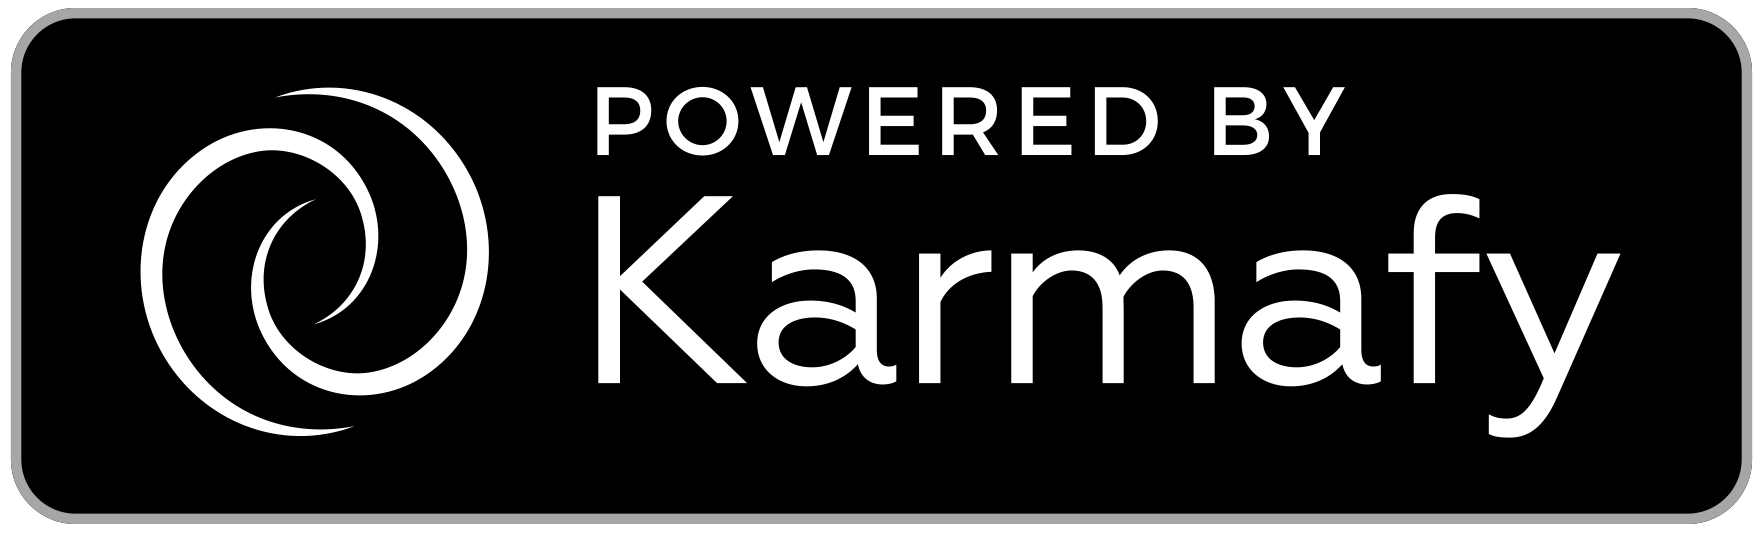 karmafy-powered-by.png